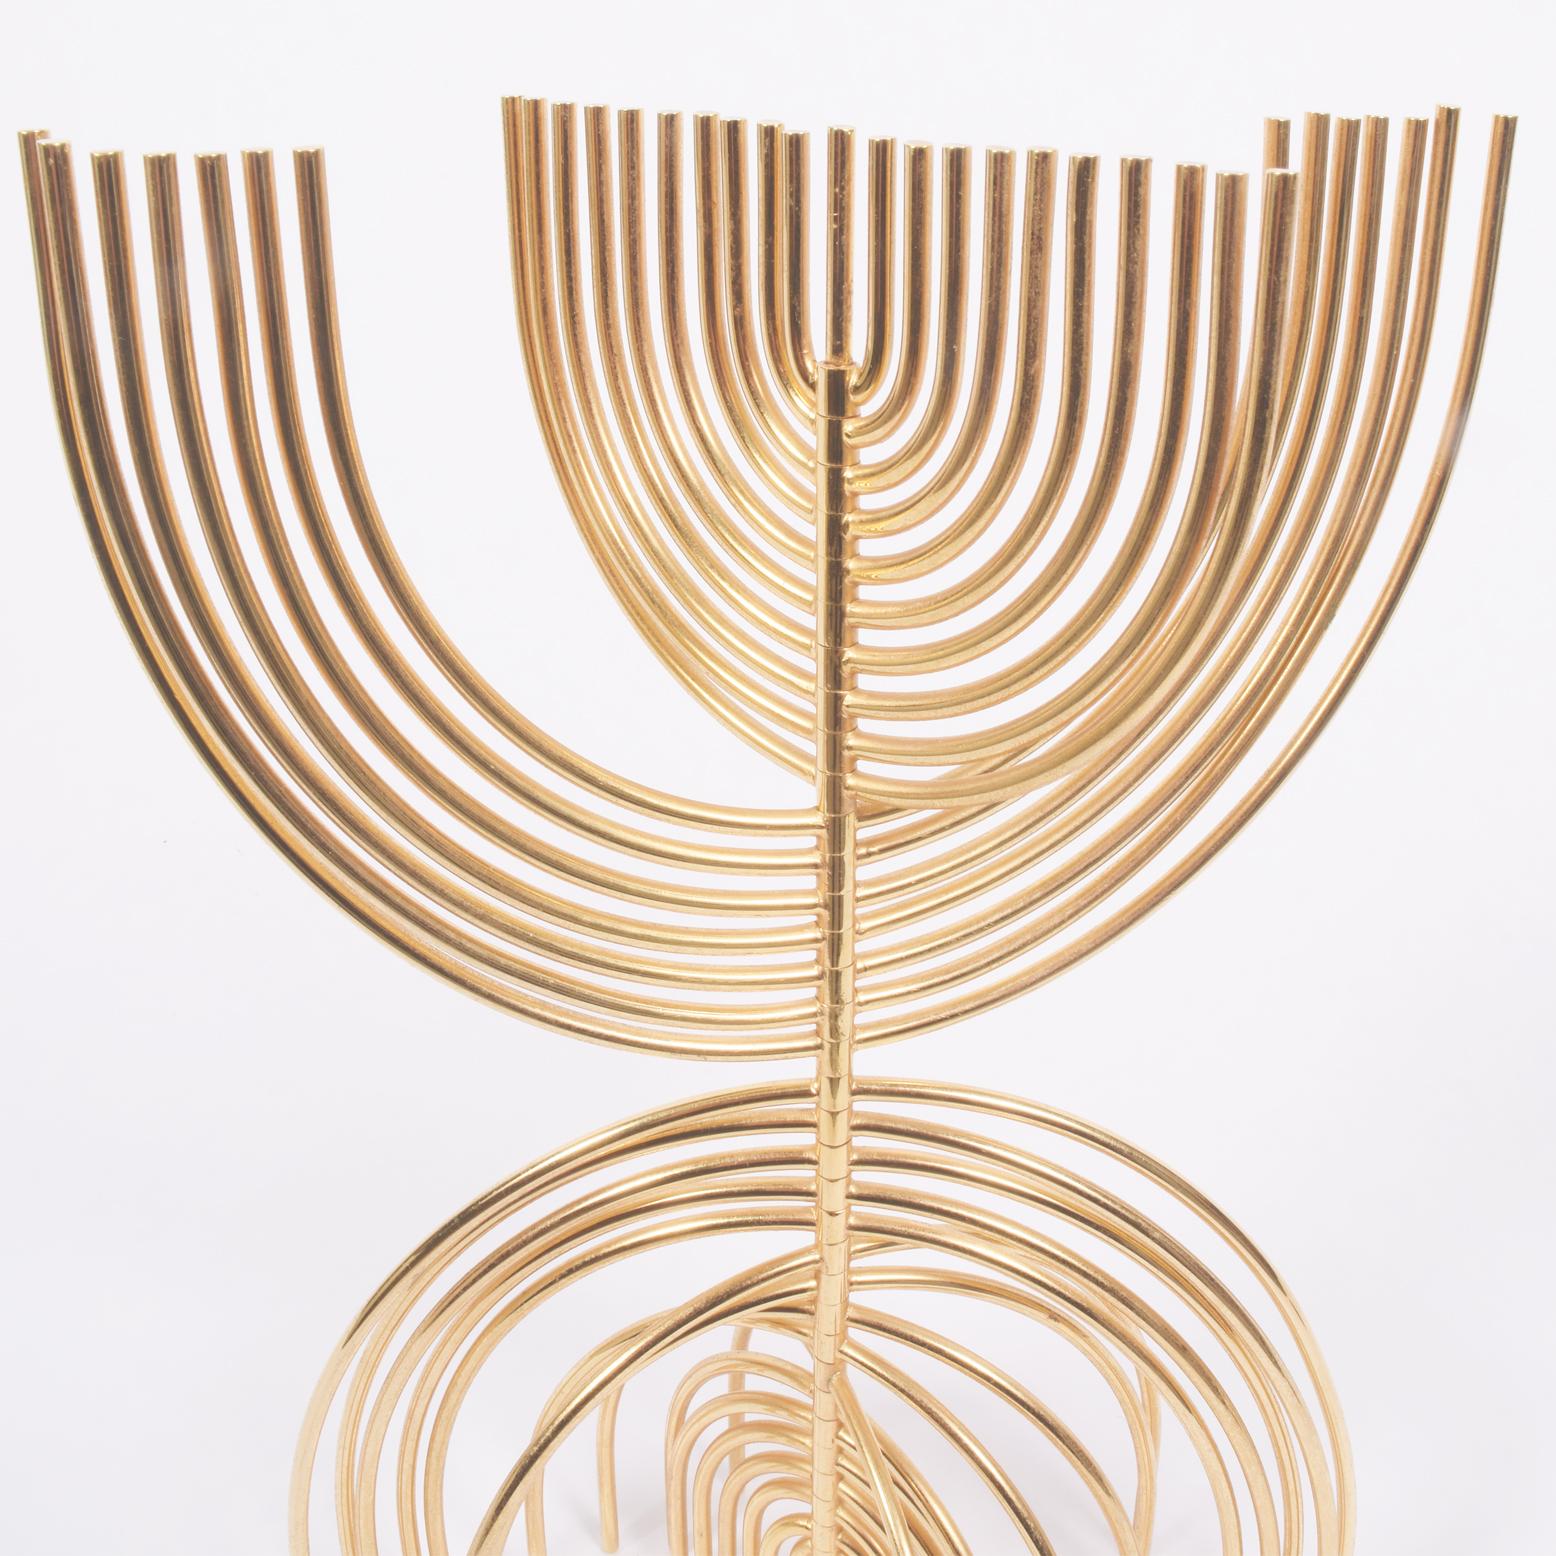 Plated Yaakov Agam Kinetic Sculpture, 1988